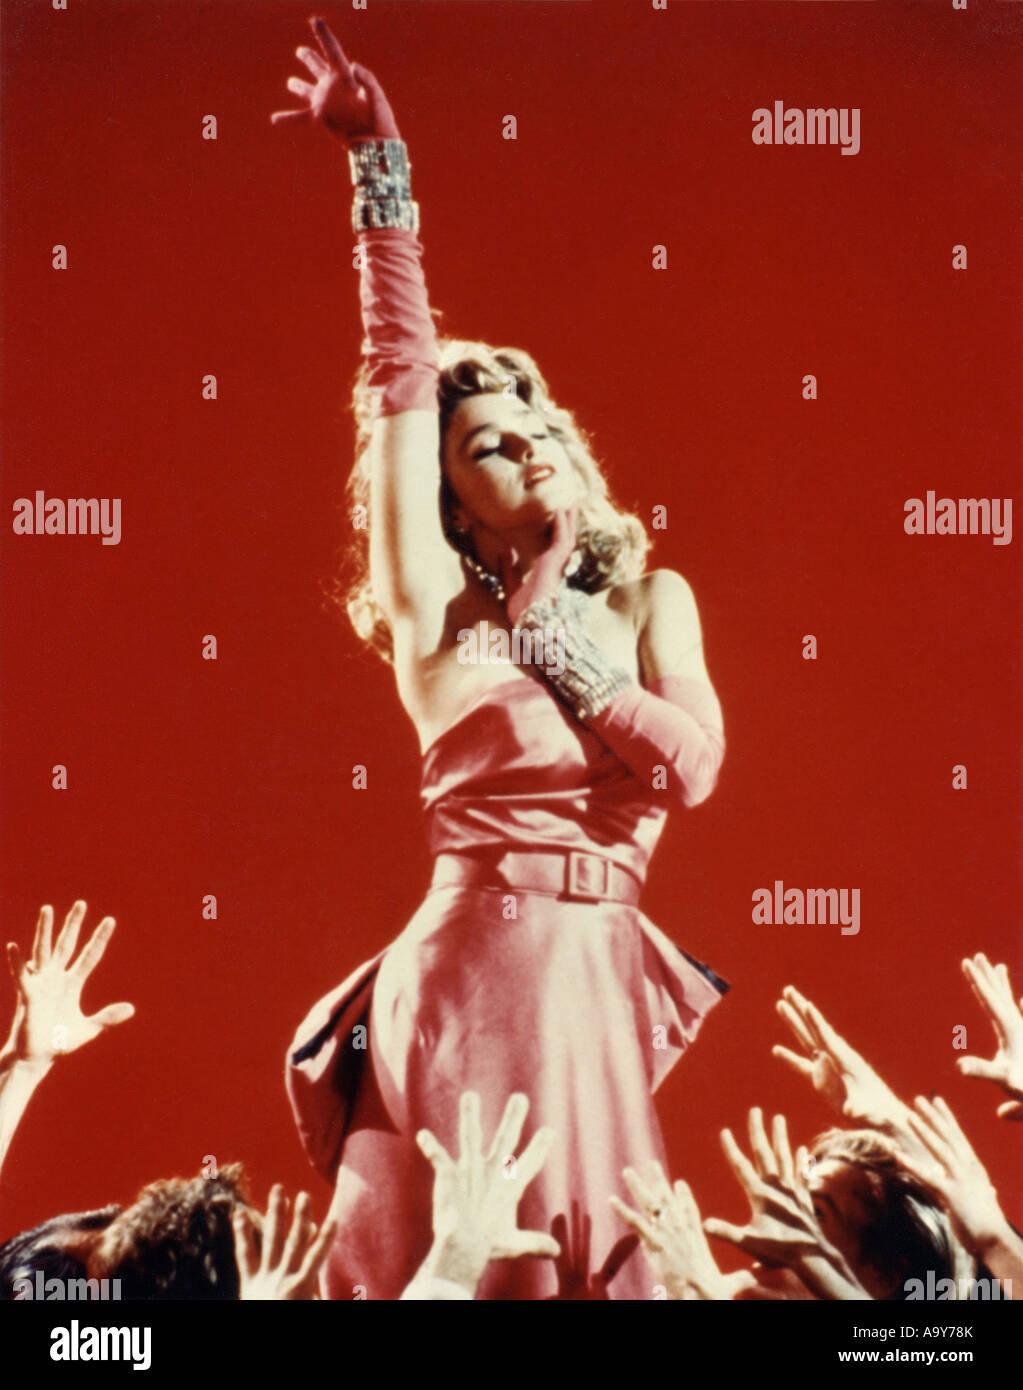 MADONNA  US singer/actress  in her 1985 Material Girl video Stock Photo